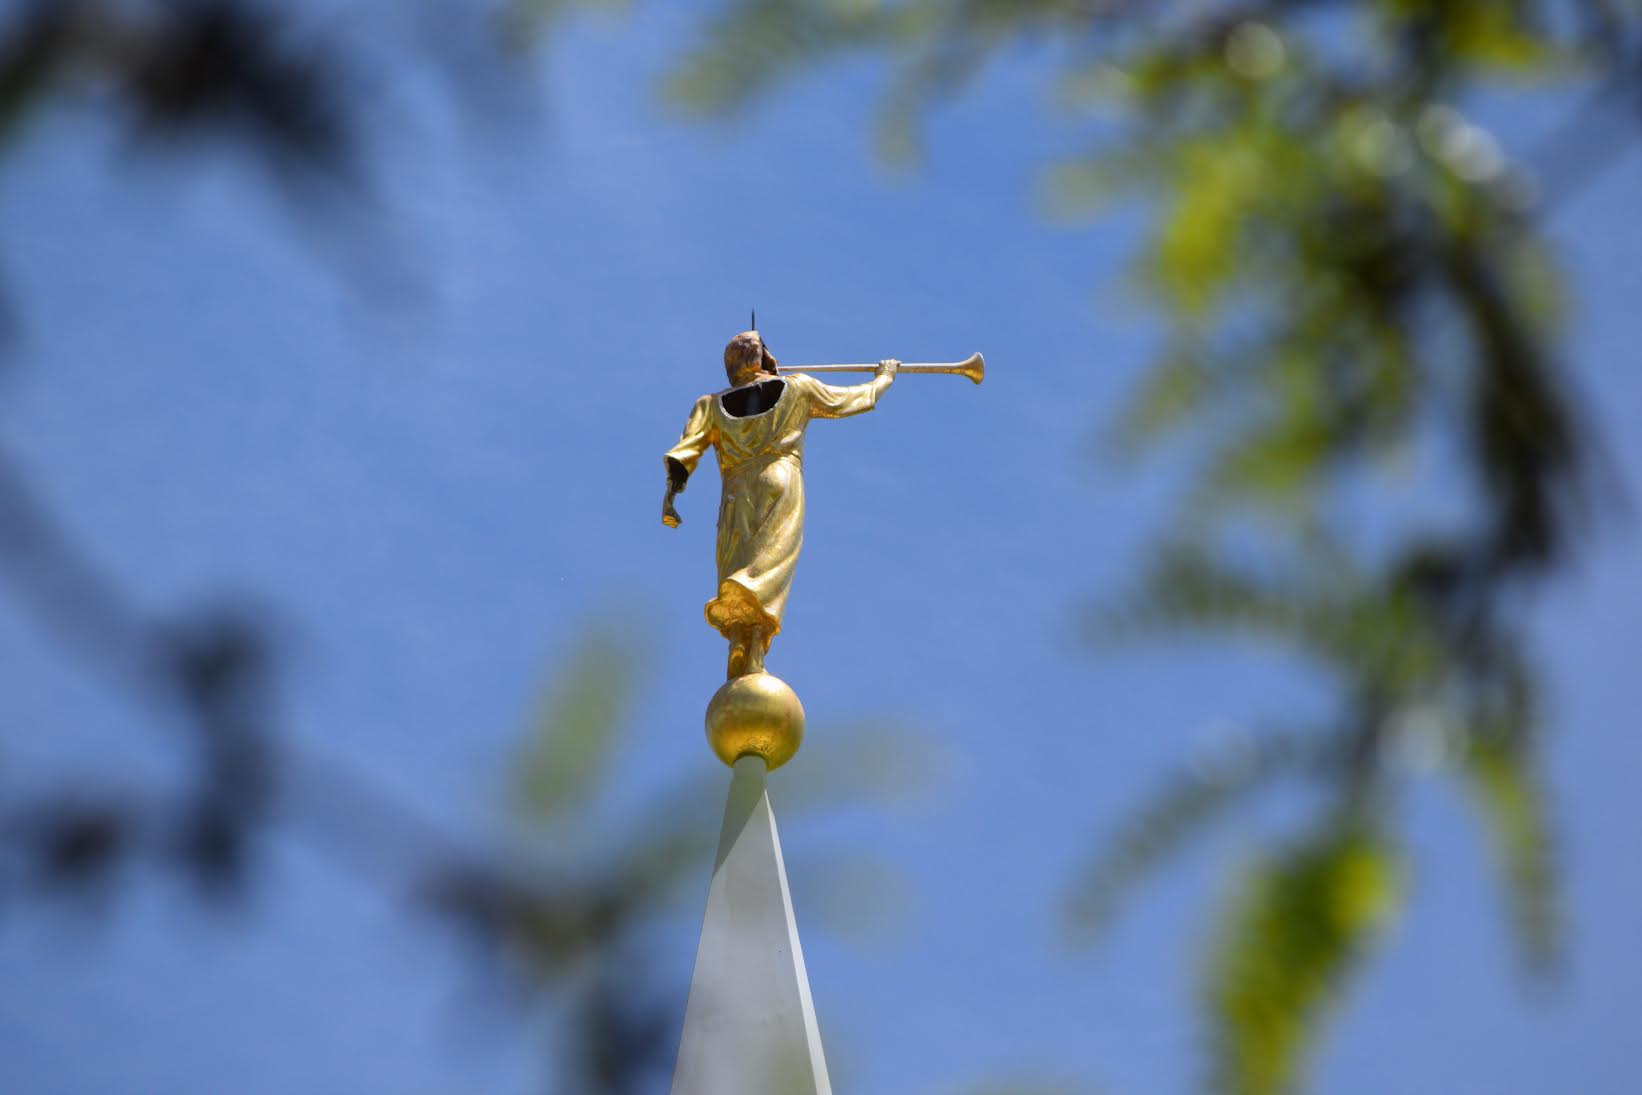 The angel Moroni figure that tops the Bountiful LDS Temple was damaged by a lightning strike. Photo: Gephardt Daily